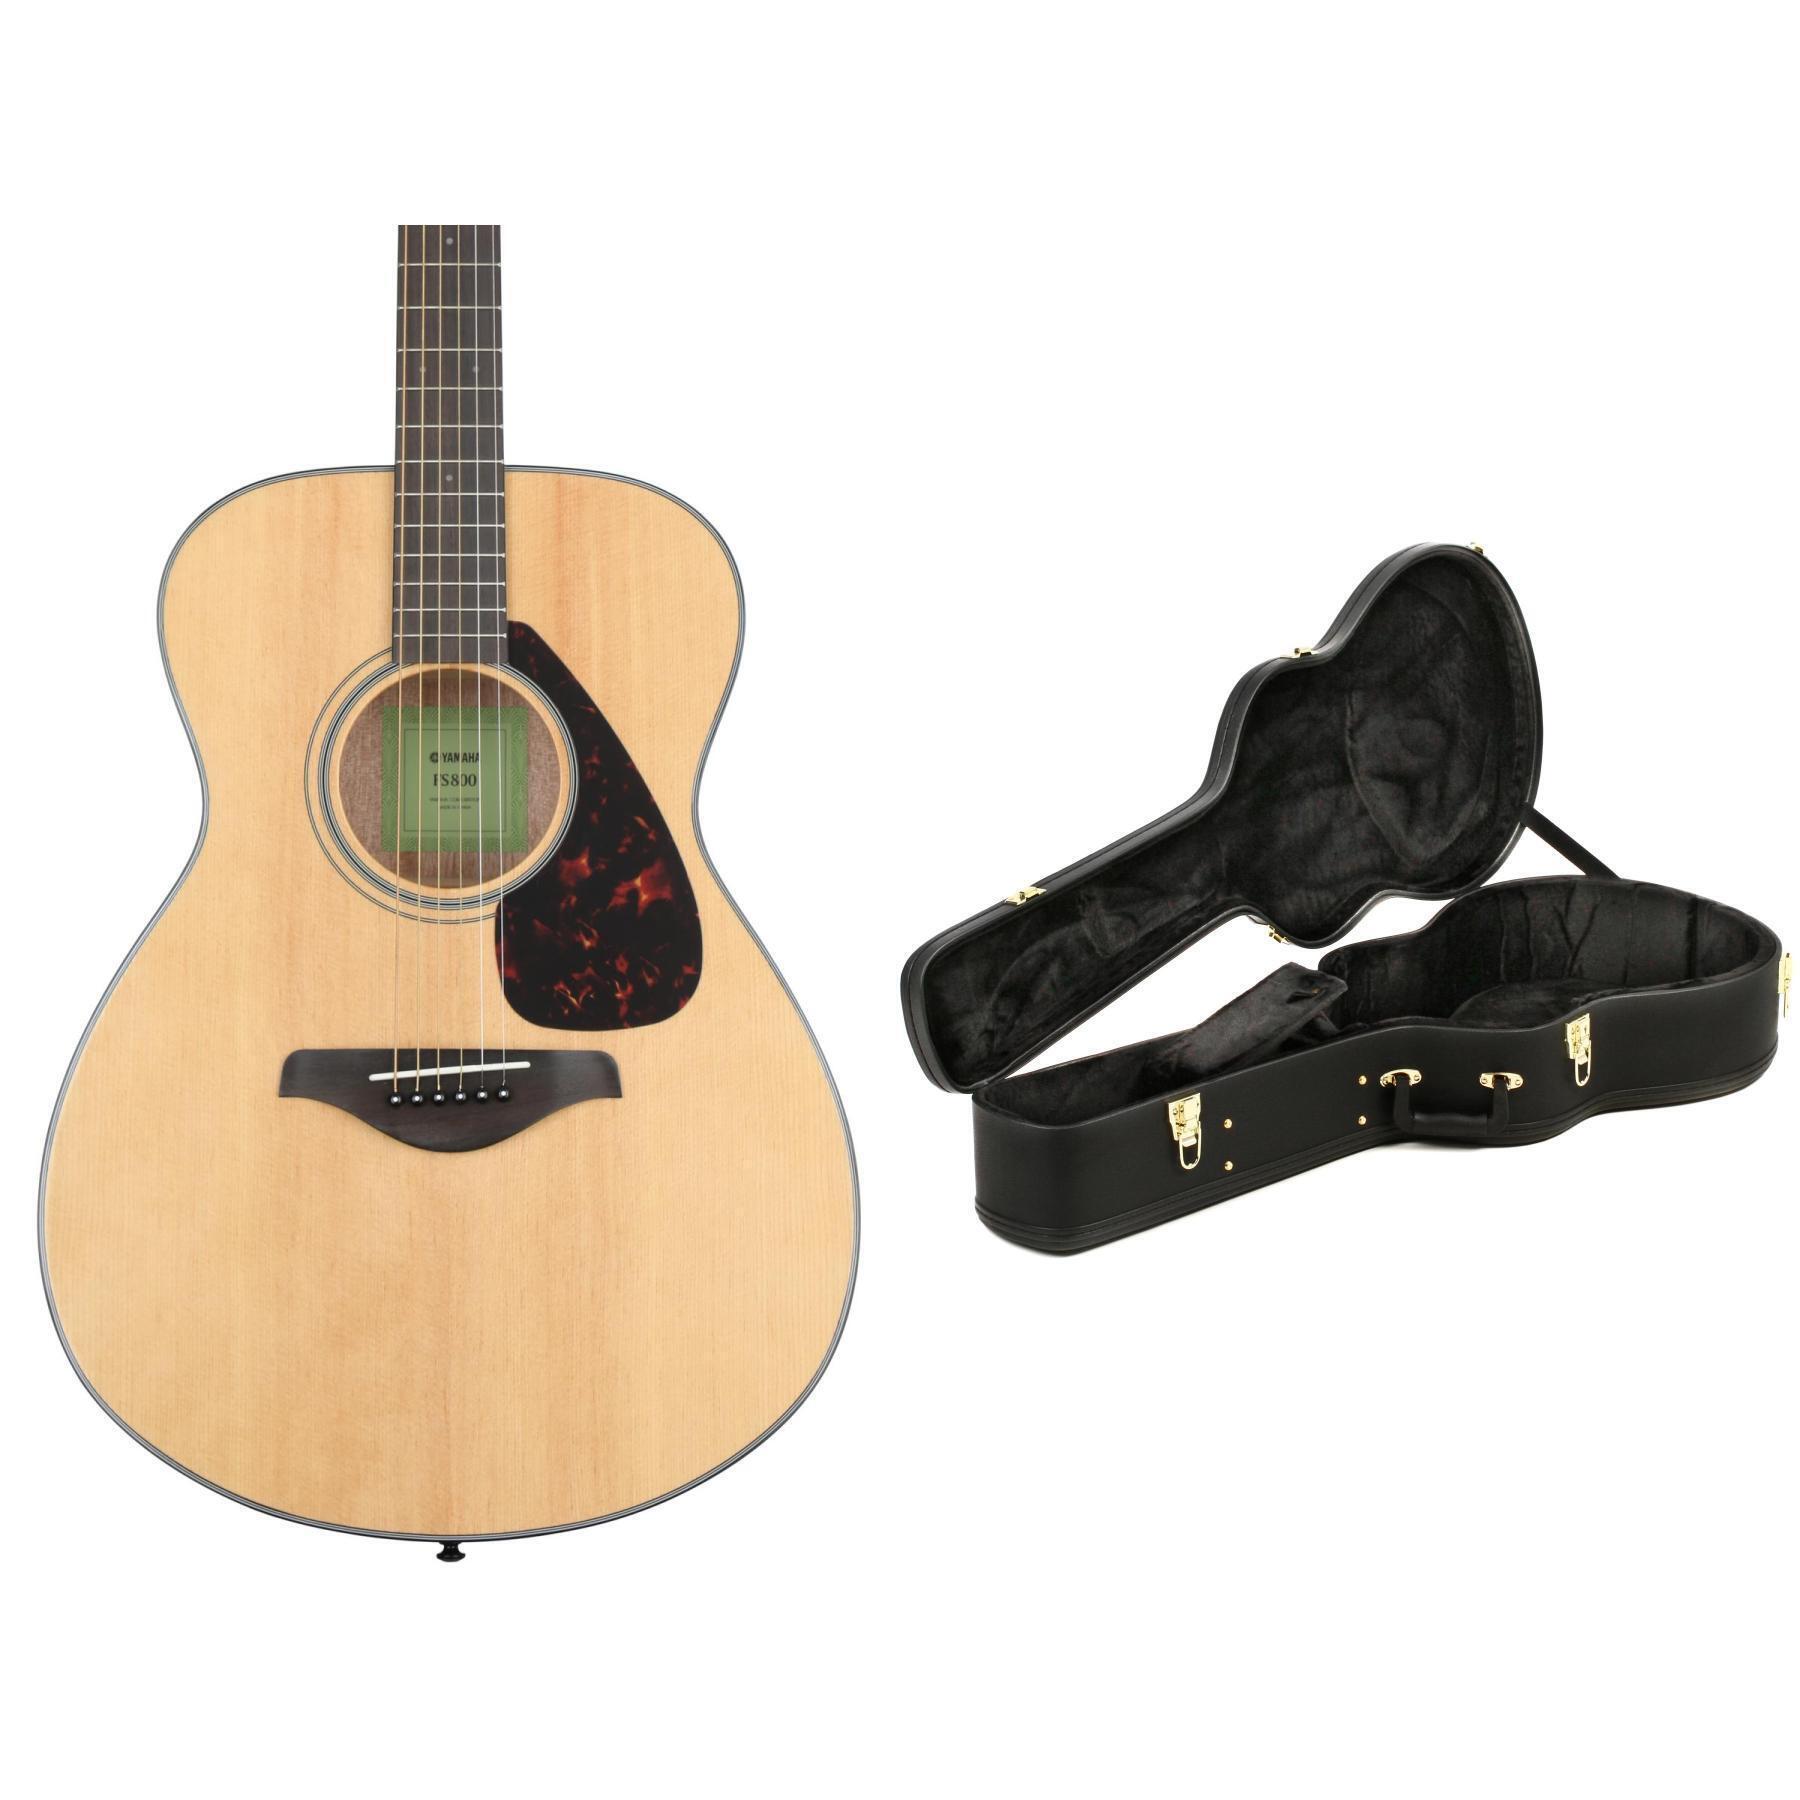 Yamaha FS800 Concert Acoustic Guitar with Case - Natural | Sweetwater